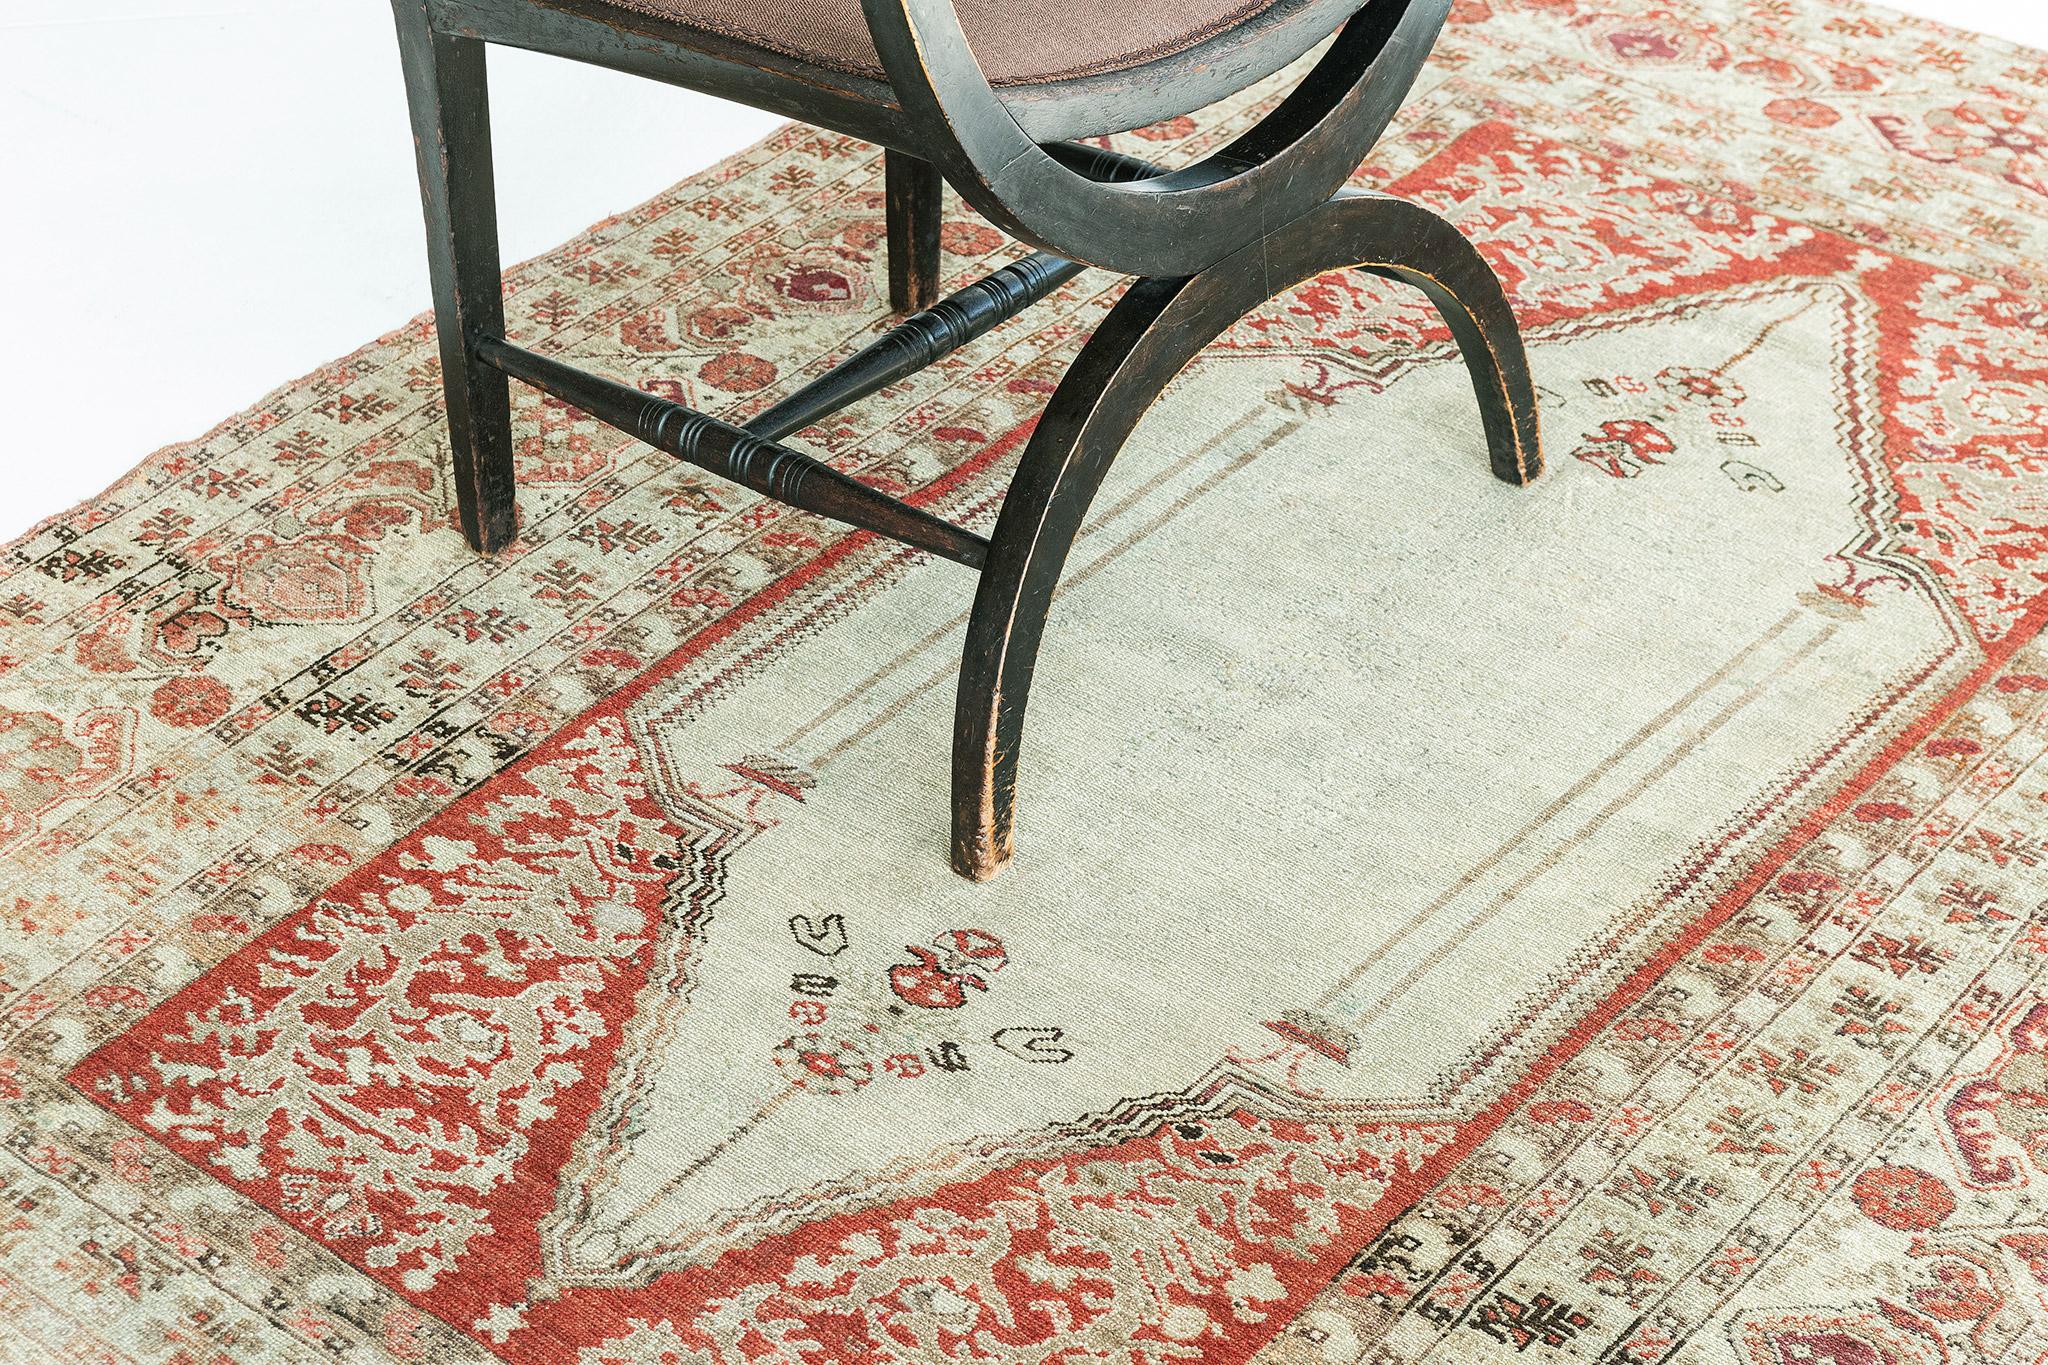 With a graceful all-over botanical pattern and striking appeal, this impressive Vintage Turkish Anatolian Rug can beautifully blend contemporary, modern, and traditional interiors. It features ornate elements of blooming palmettes and stylized